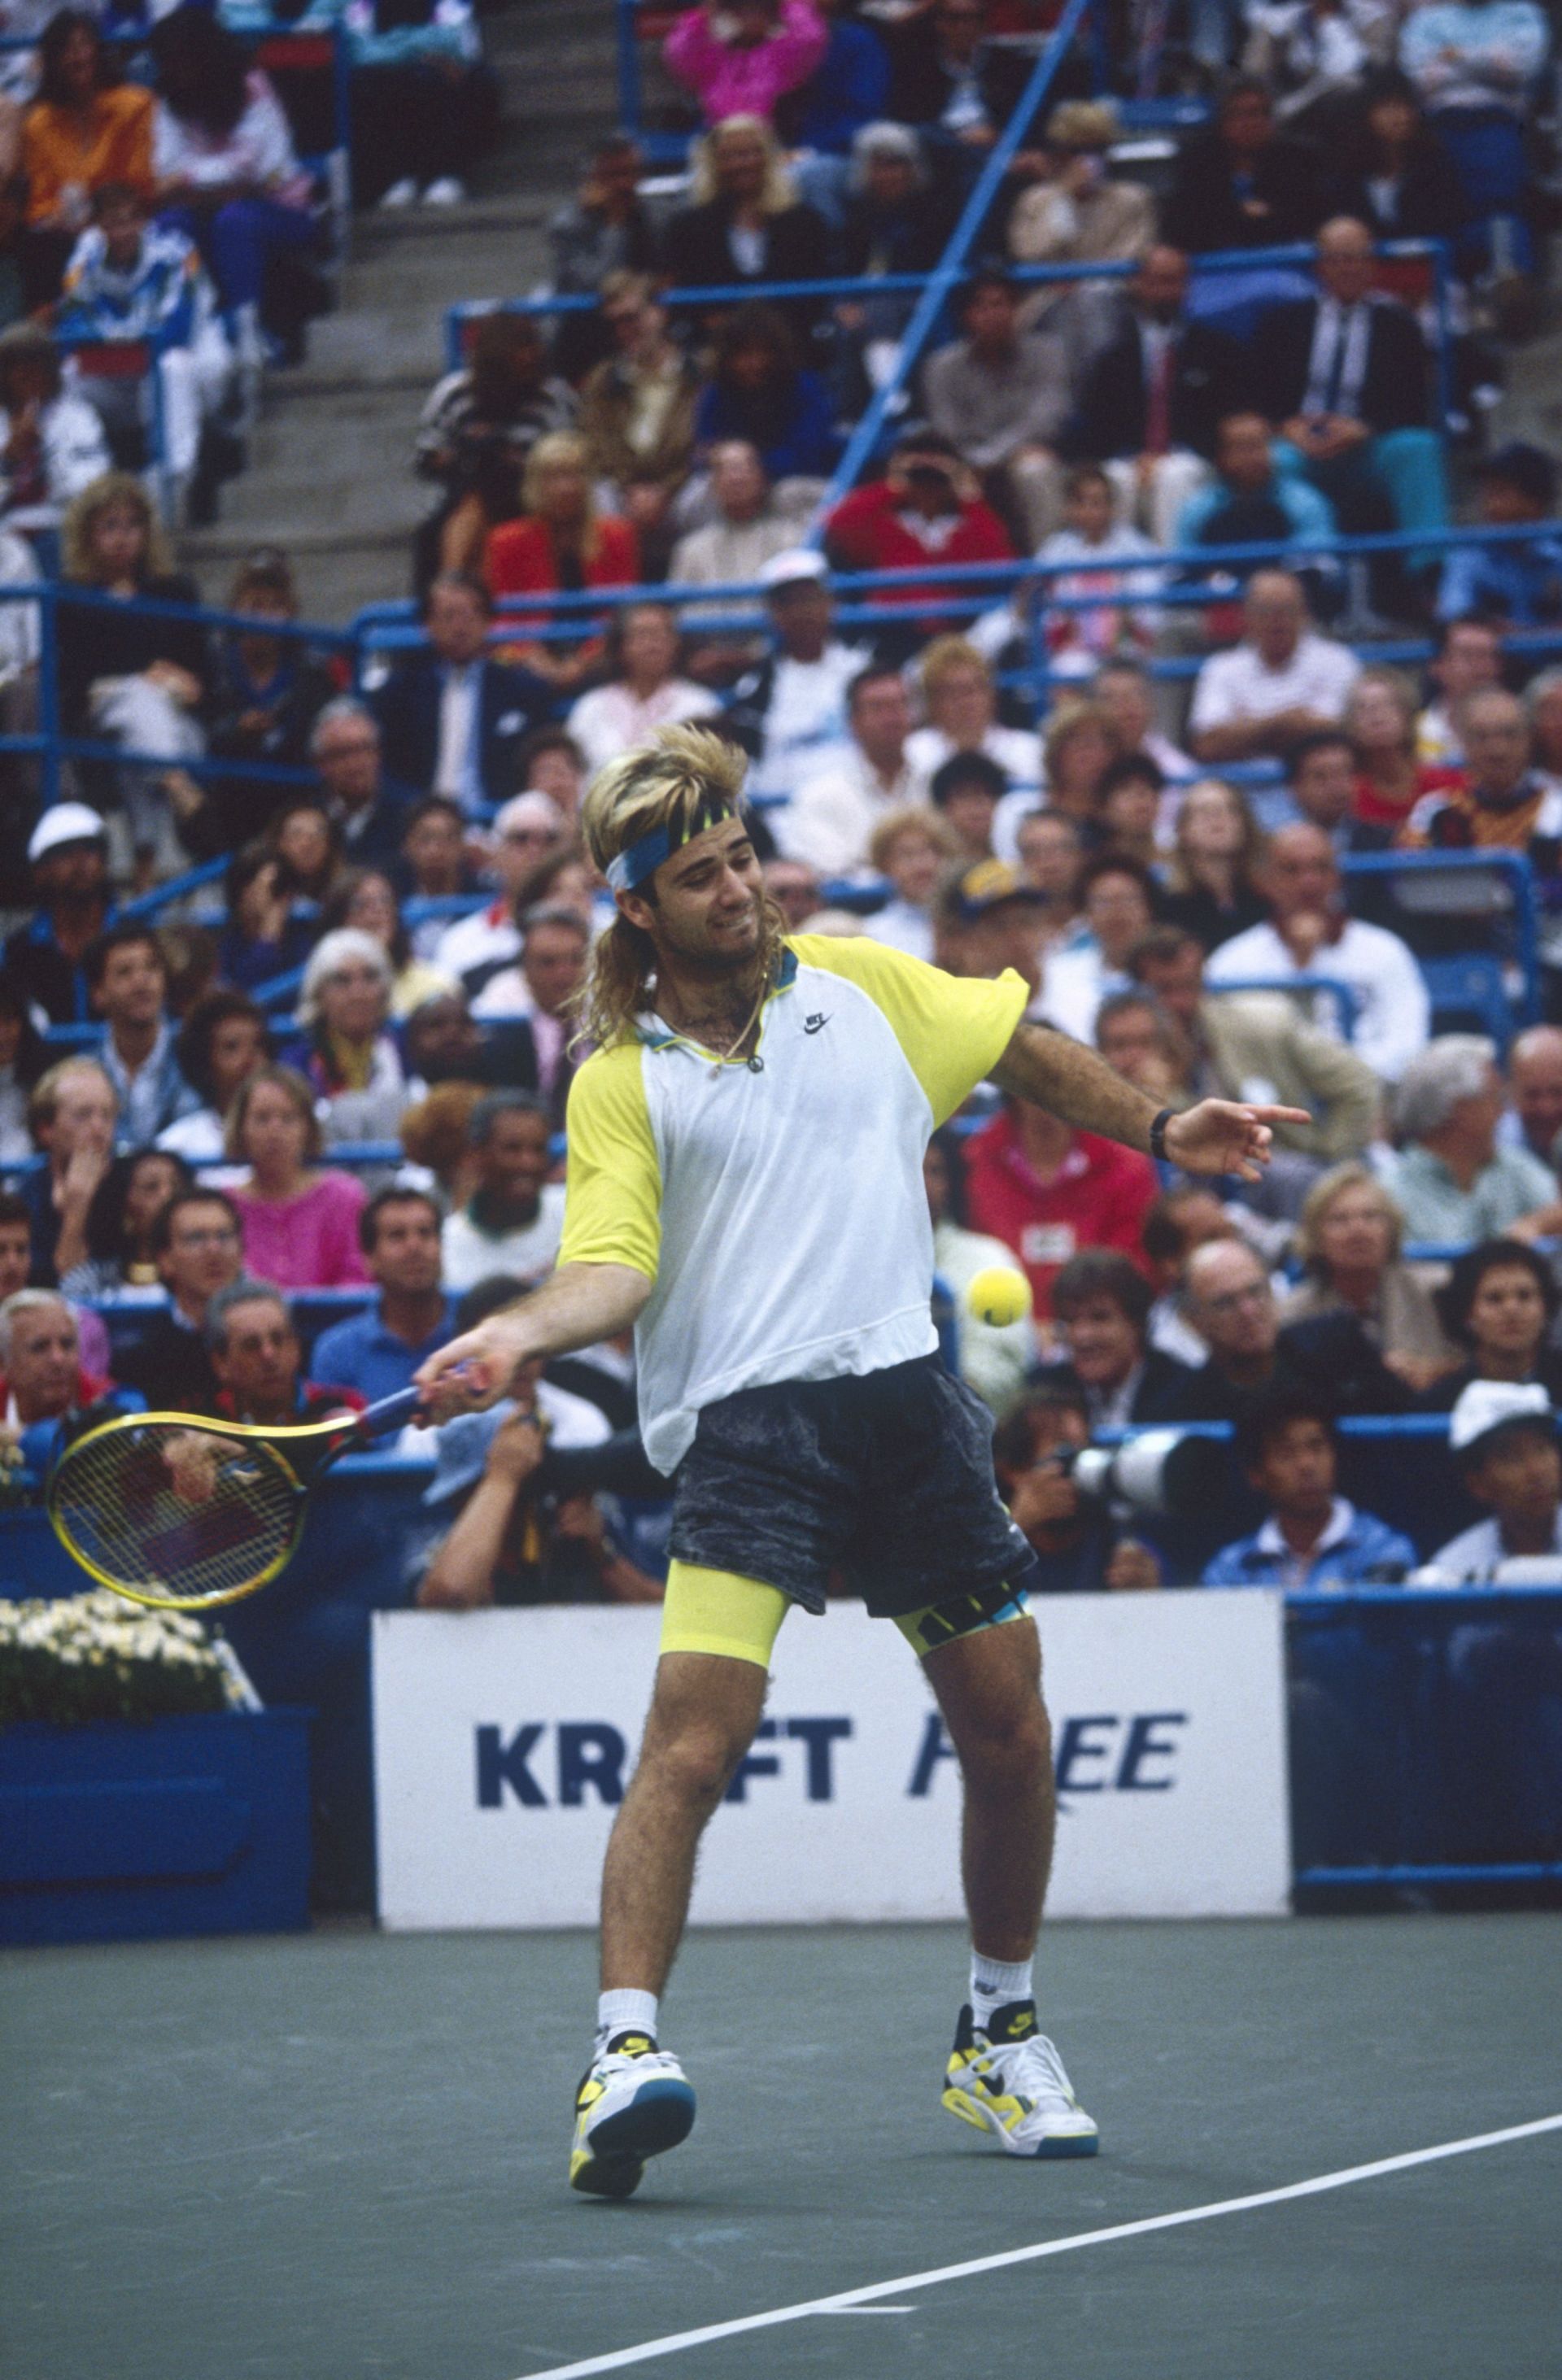 Andre Agassi at the 1990 U.S Open